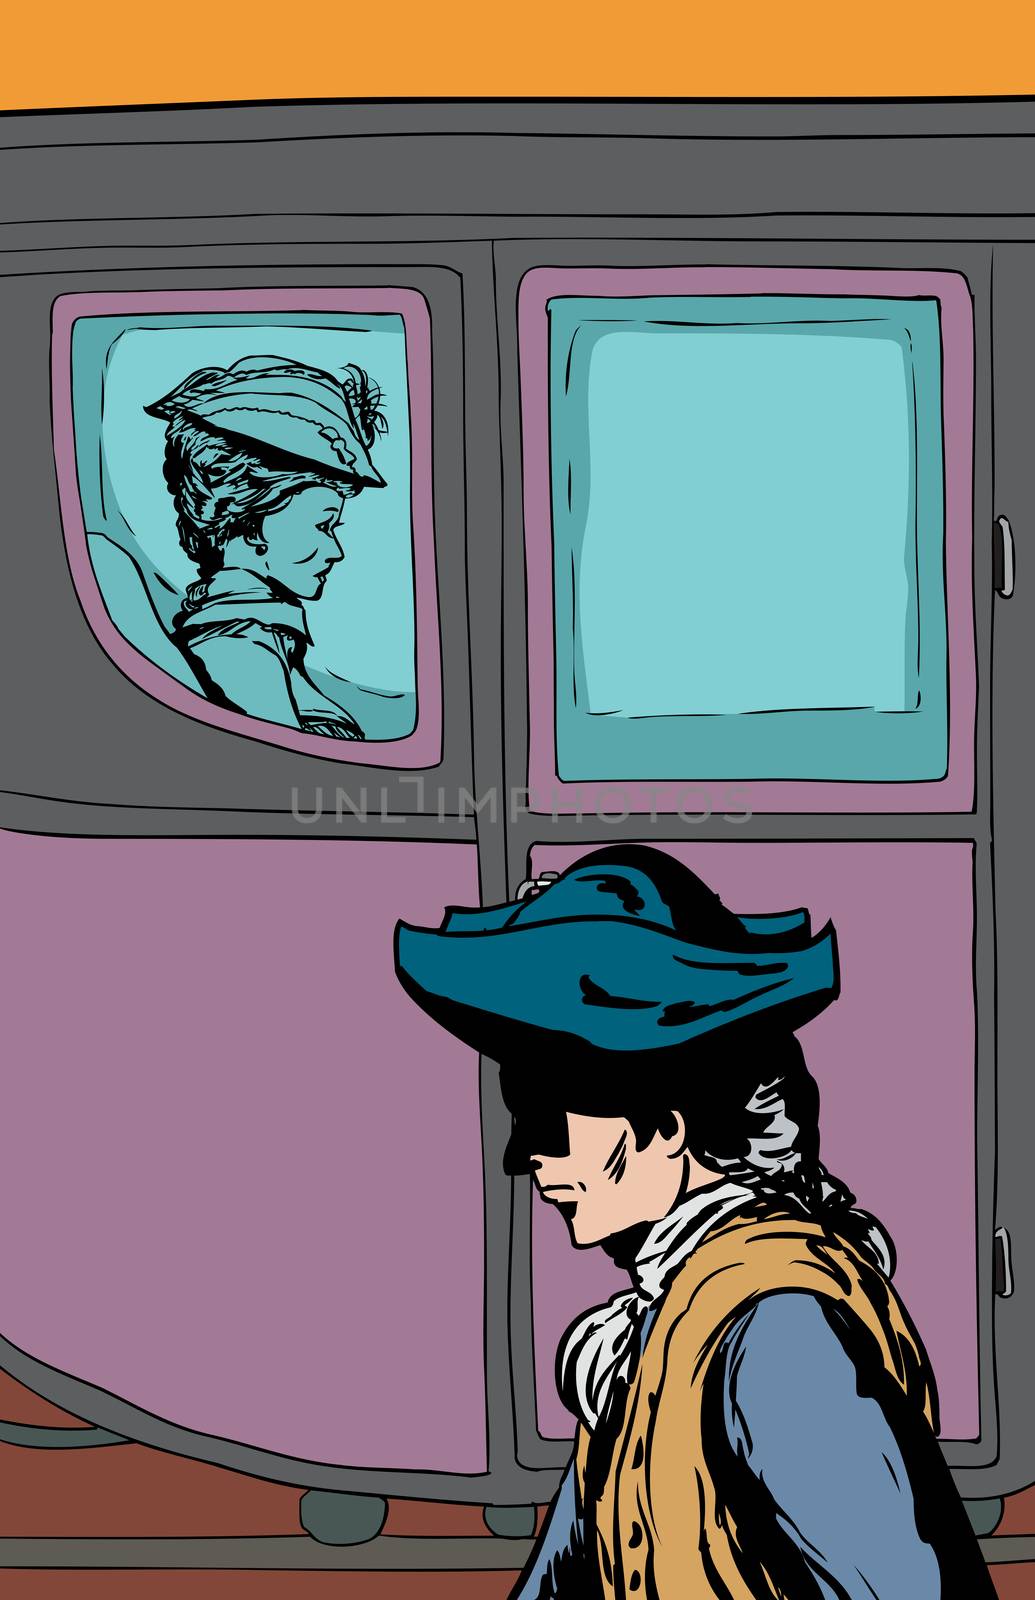 Man in tricorn hat walking past wealthy 18th century woman carriage with glass windows